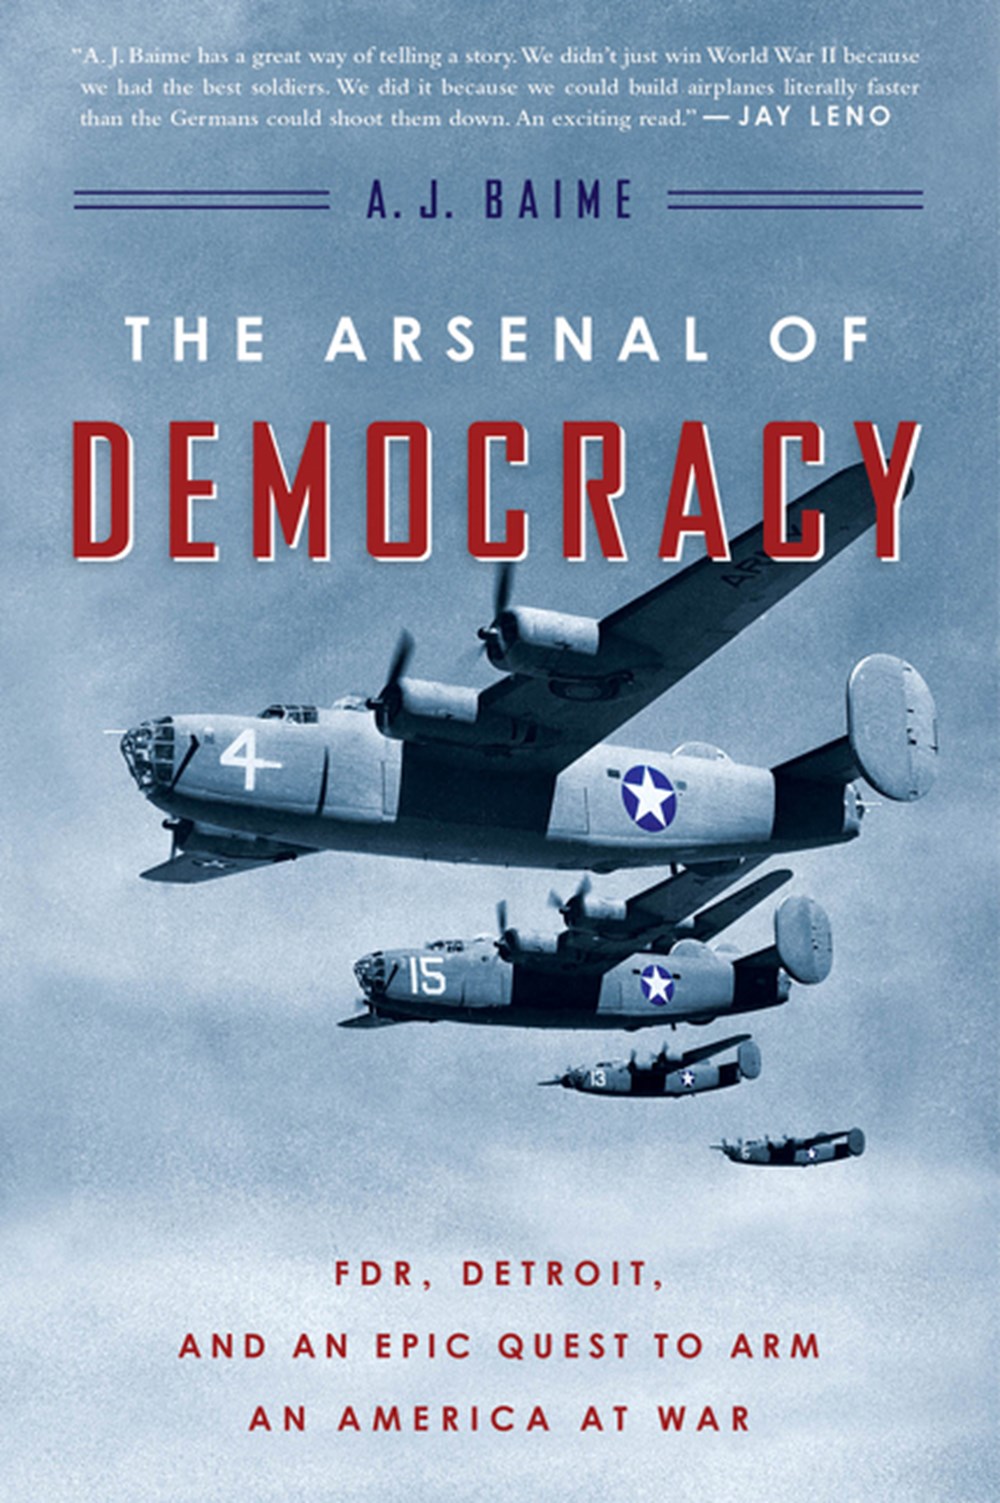 Arsenal of Democracy: Fdr, Detroit, and an Epic Quest to Arm an America at War